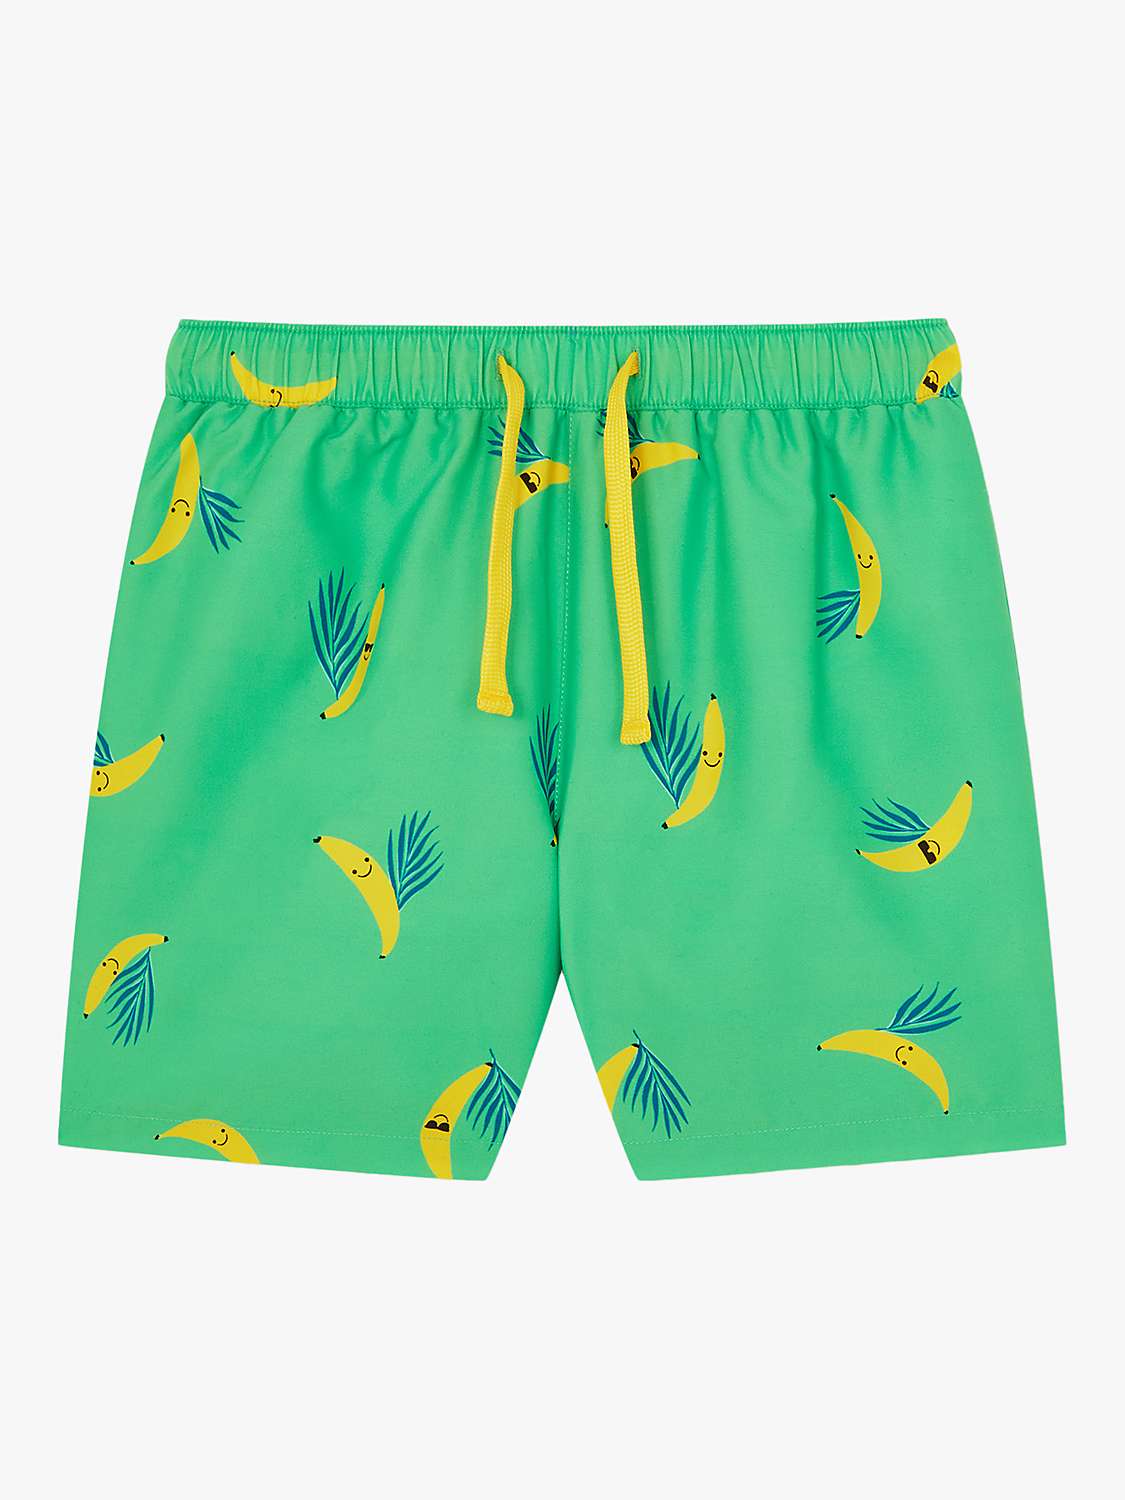 Buy Angels by Accessorize Kids' Banana Print Swim Shorts, Green/Multi Online at johnlewis.com